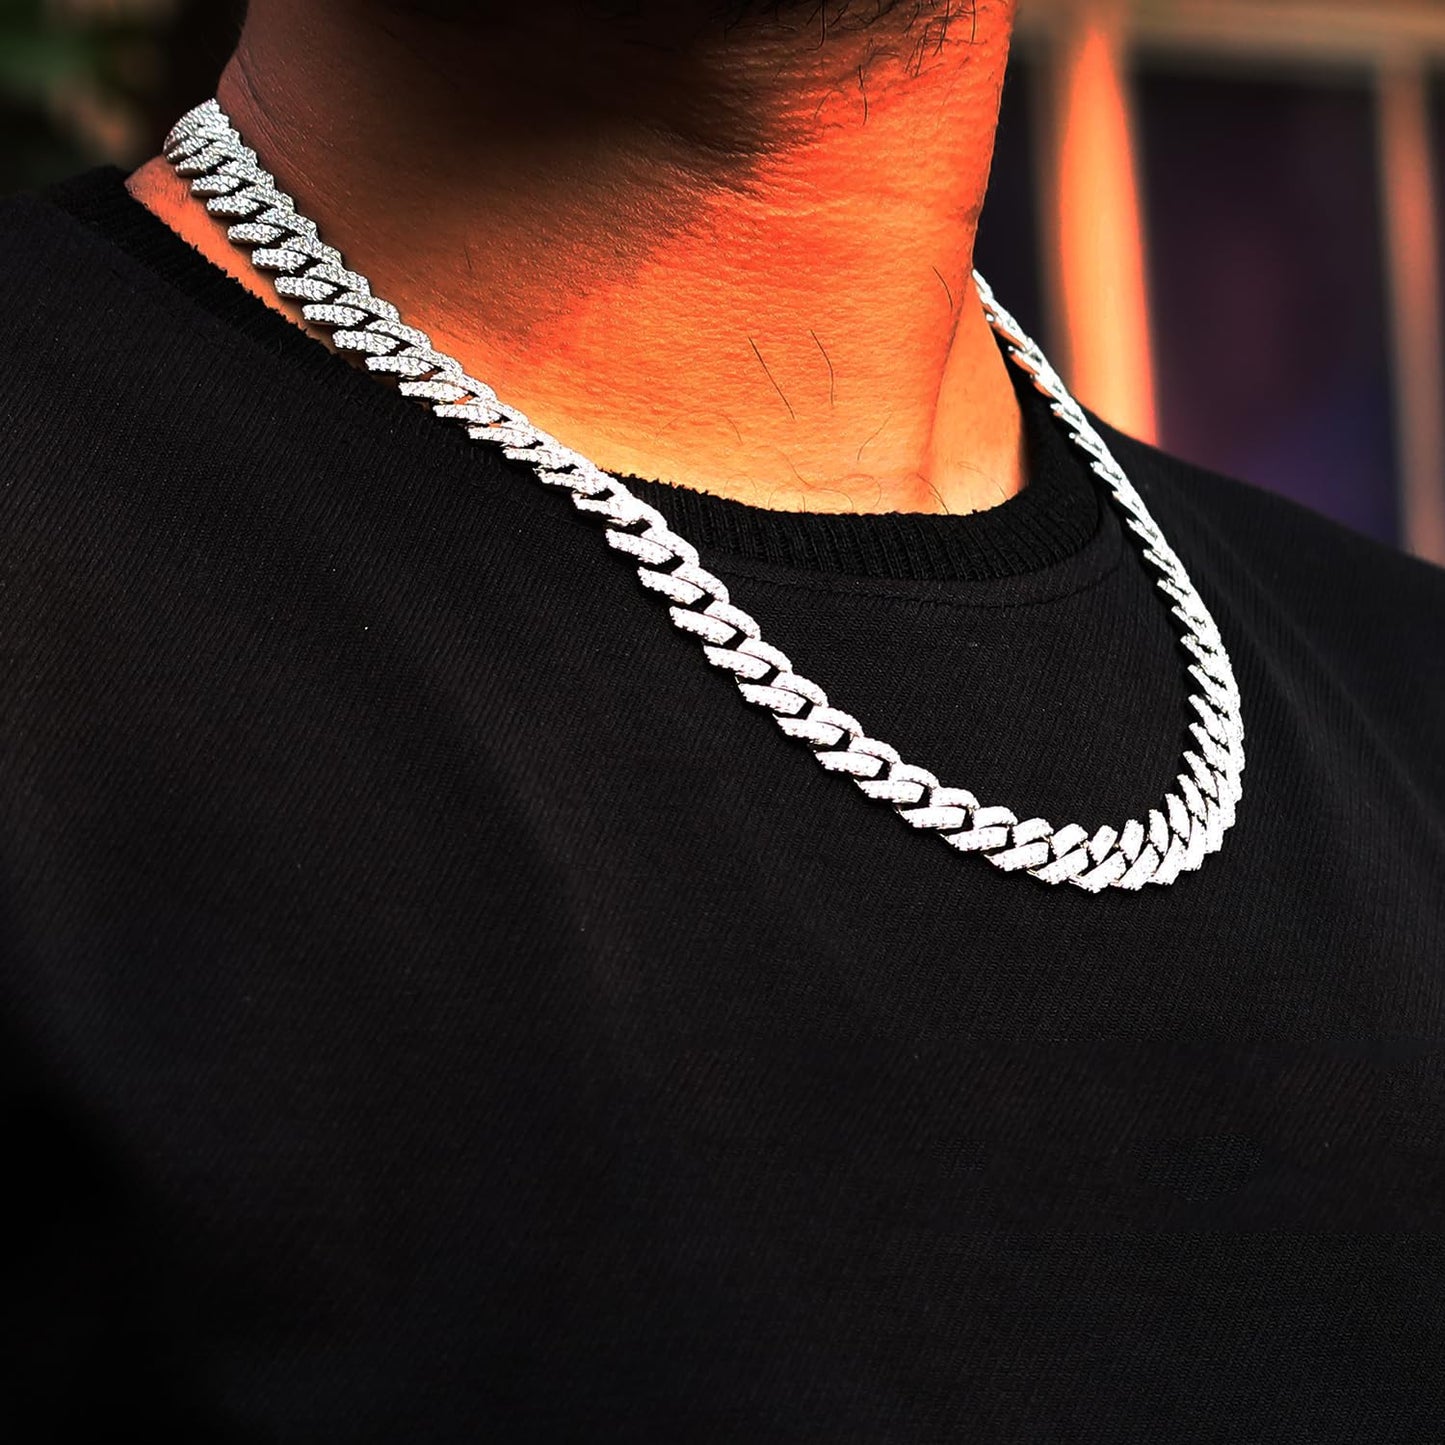 15.25 Ct to 28.25 Ct Lab Created Moissanite Diamond 12MM Width Cuban Link Chain Necklace In 14k Gold Over Sterling Silver 16" to 30" Length, Valentine's Day Gift For Him